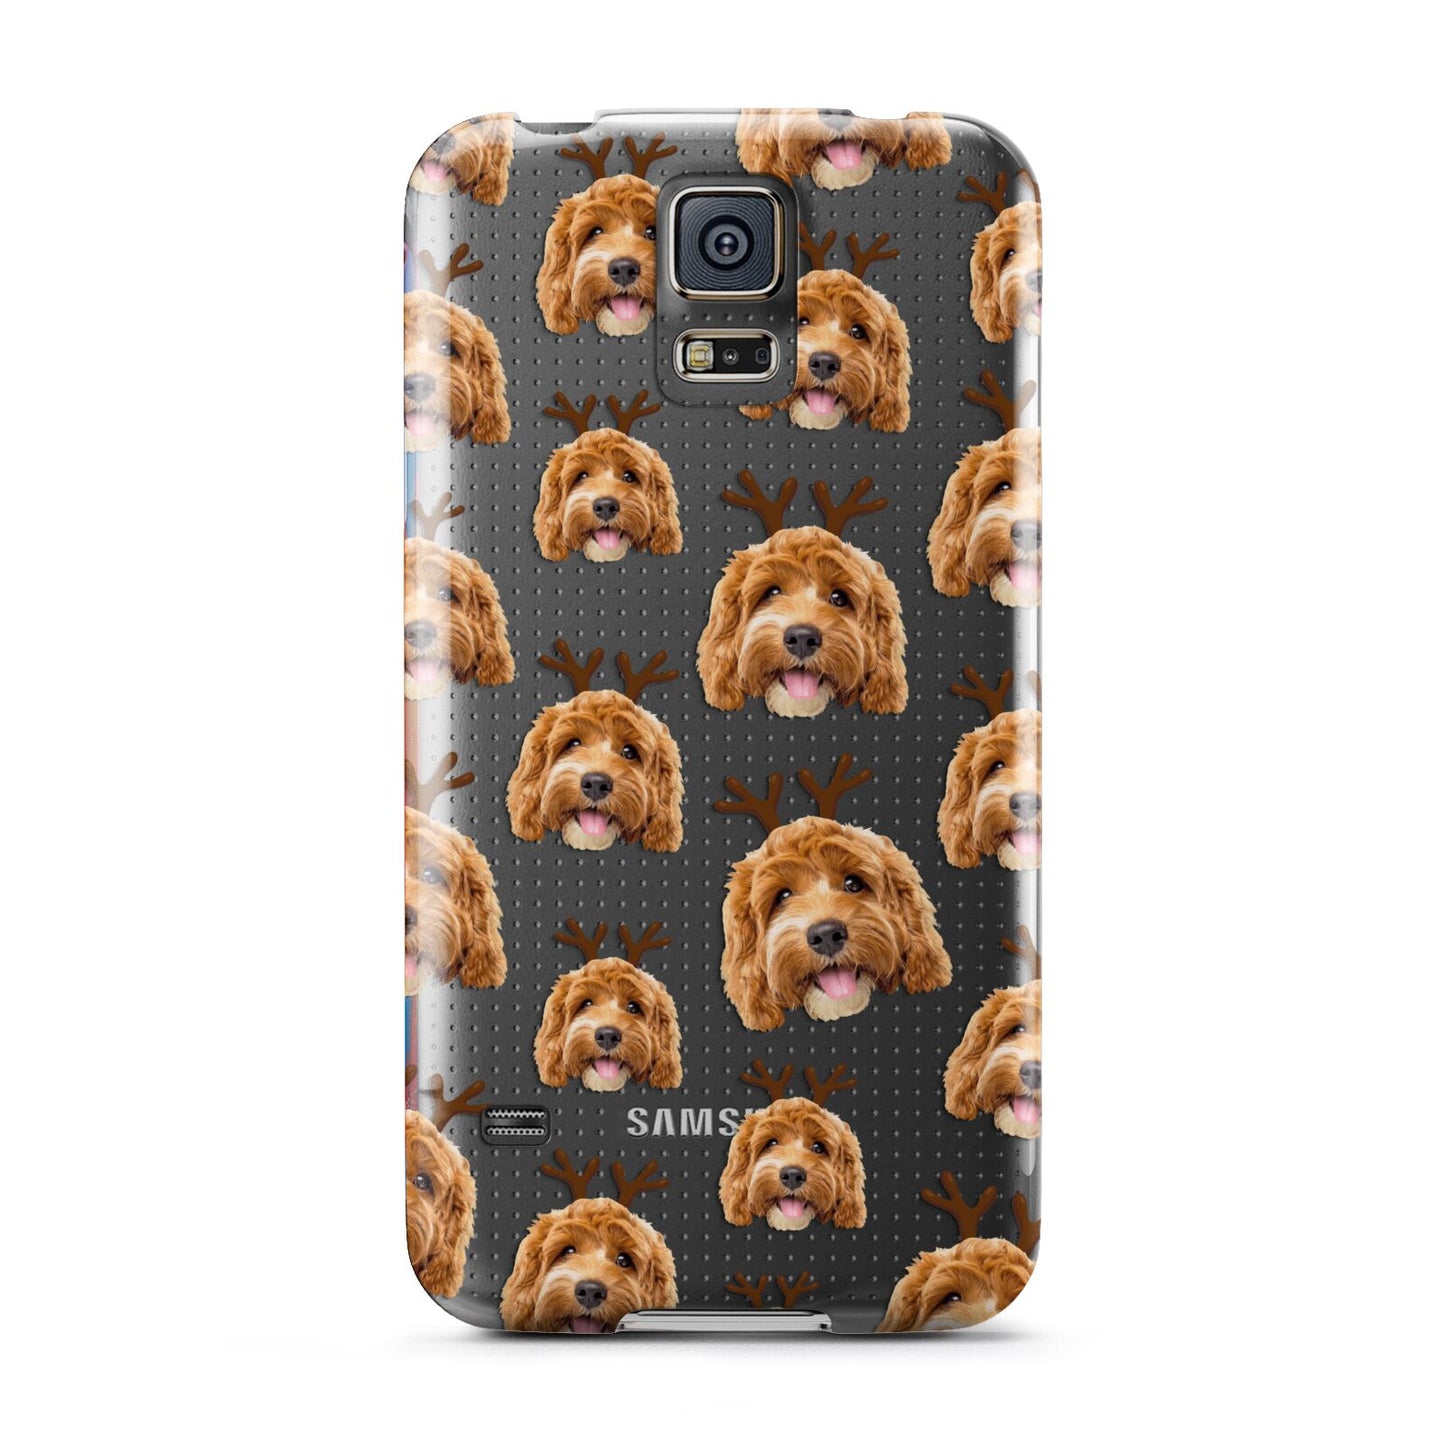 Personalised Christmas Dog Antler Samsung Galaxy S5 Case